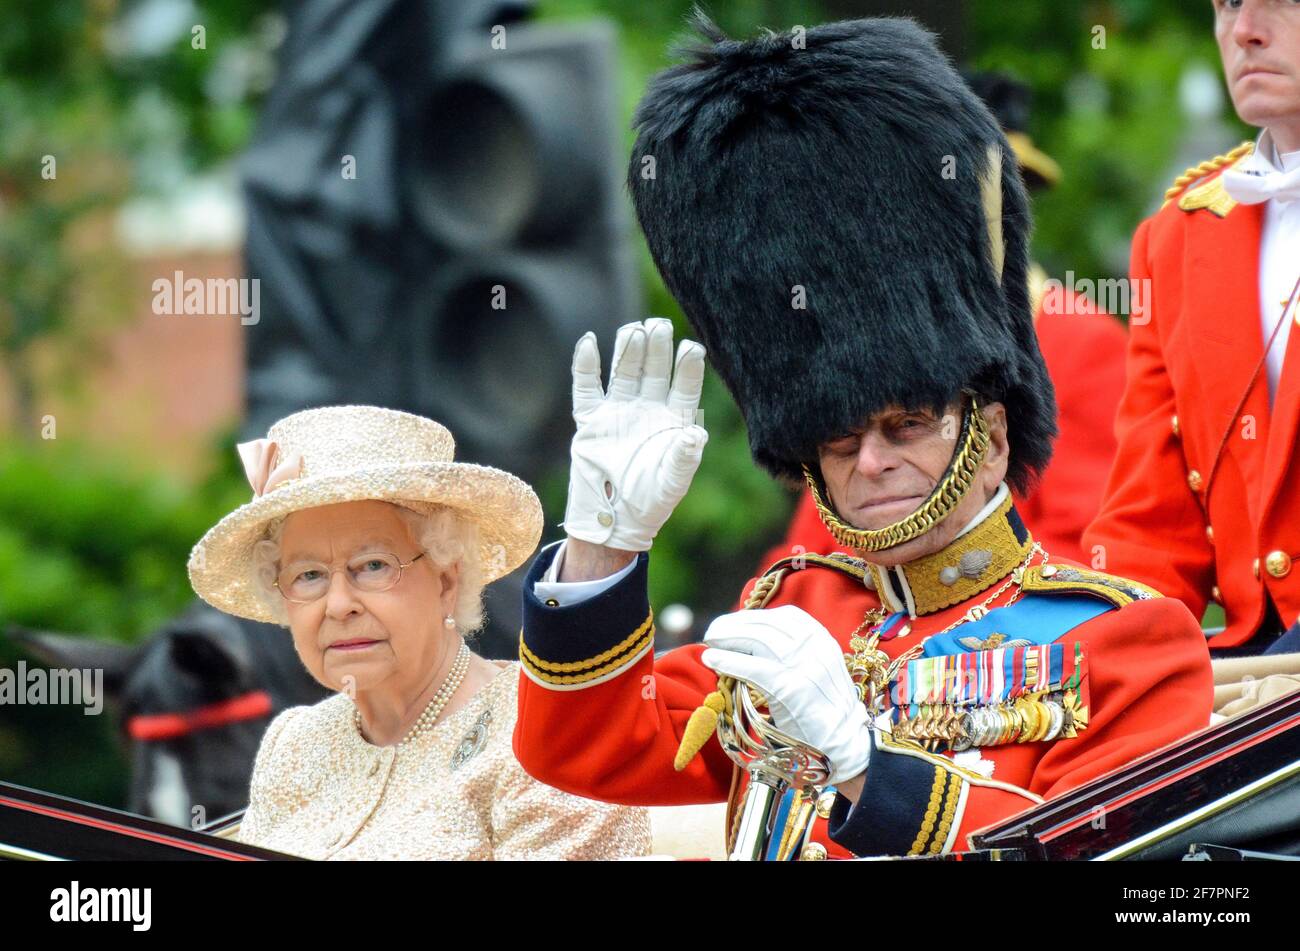 The Mall, London, UK. 13th Jun, 2015. Prince Philip, Duke of Edinburgh, pictured at the Trooping of the Colour ceremony with the Queen in 2015, the penultimate year wearing military uniform. The Prince appeared in uniform again in 2016, then in a suit in 2017 – his final year at the ceremony Stock Photo